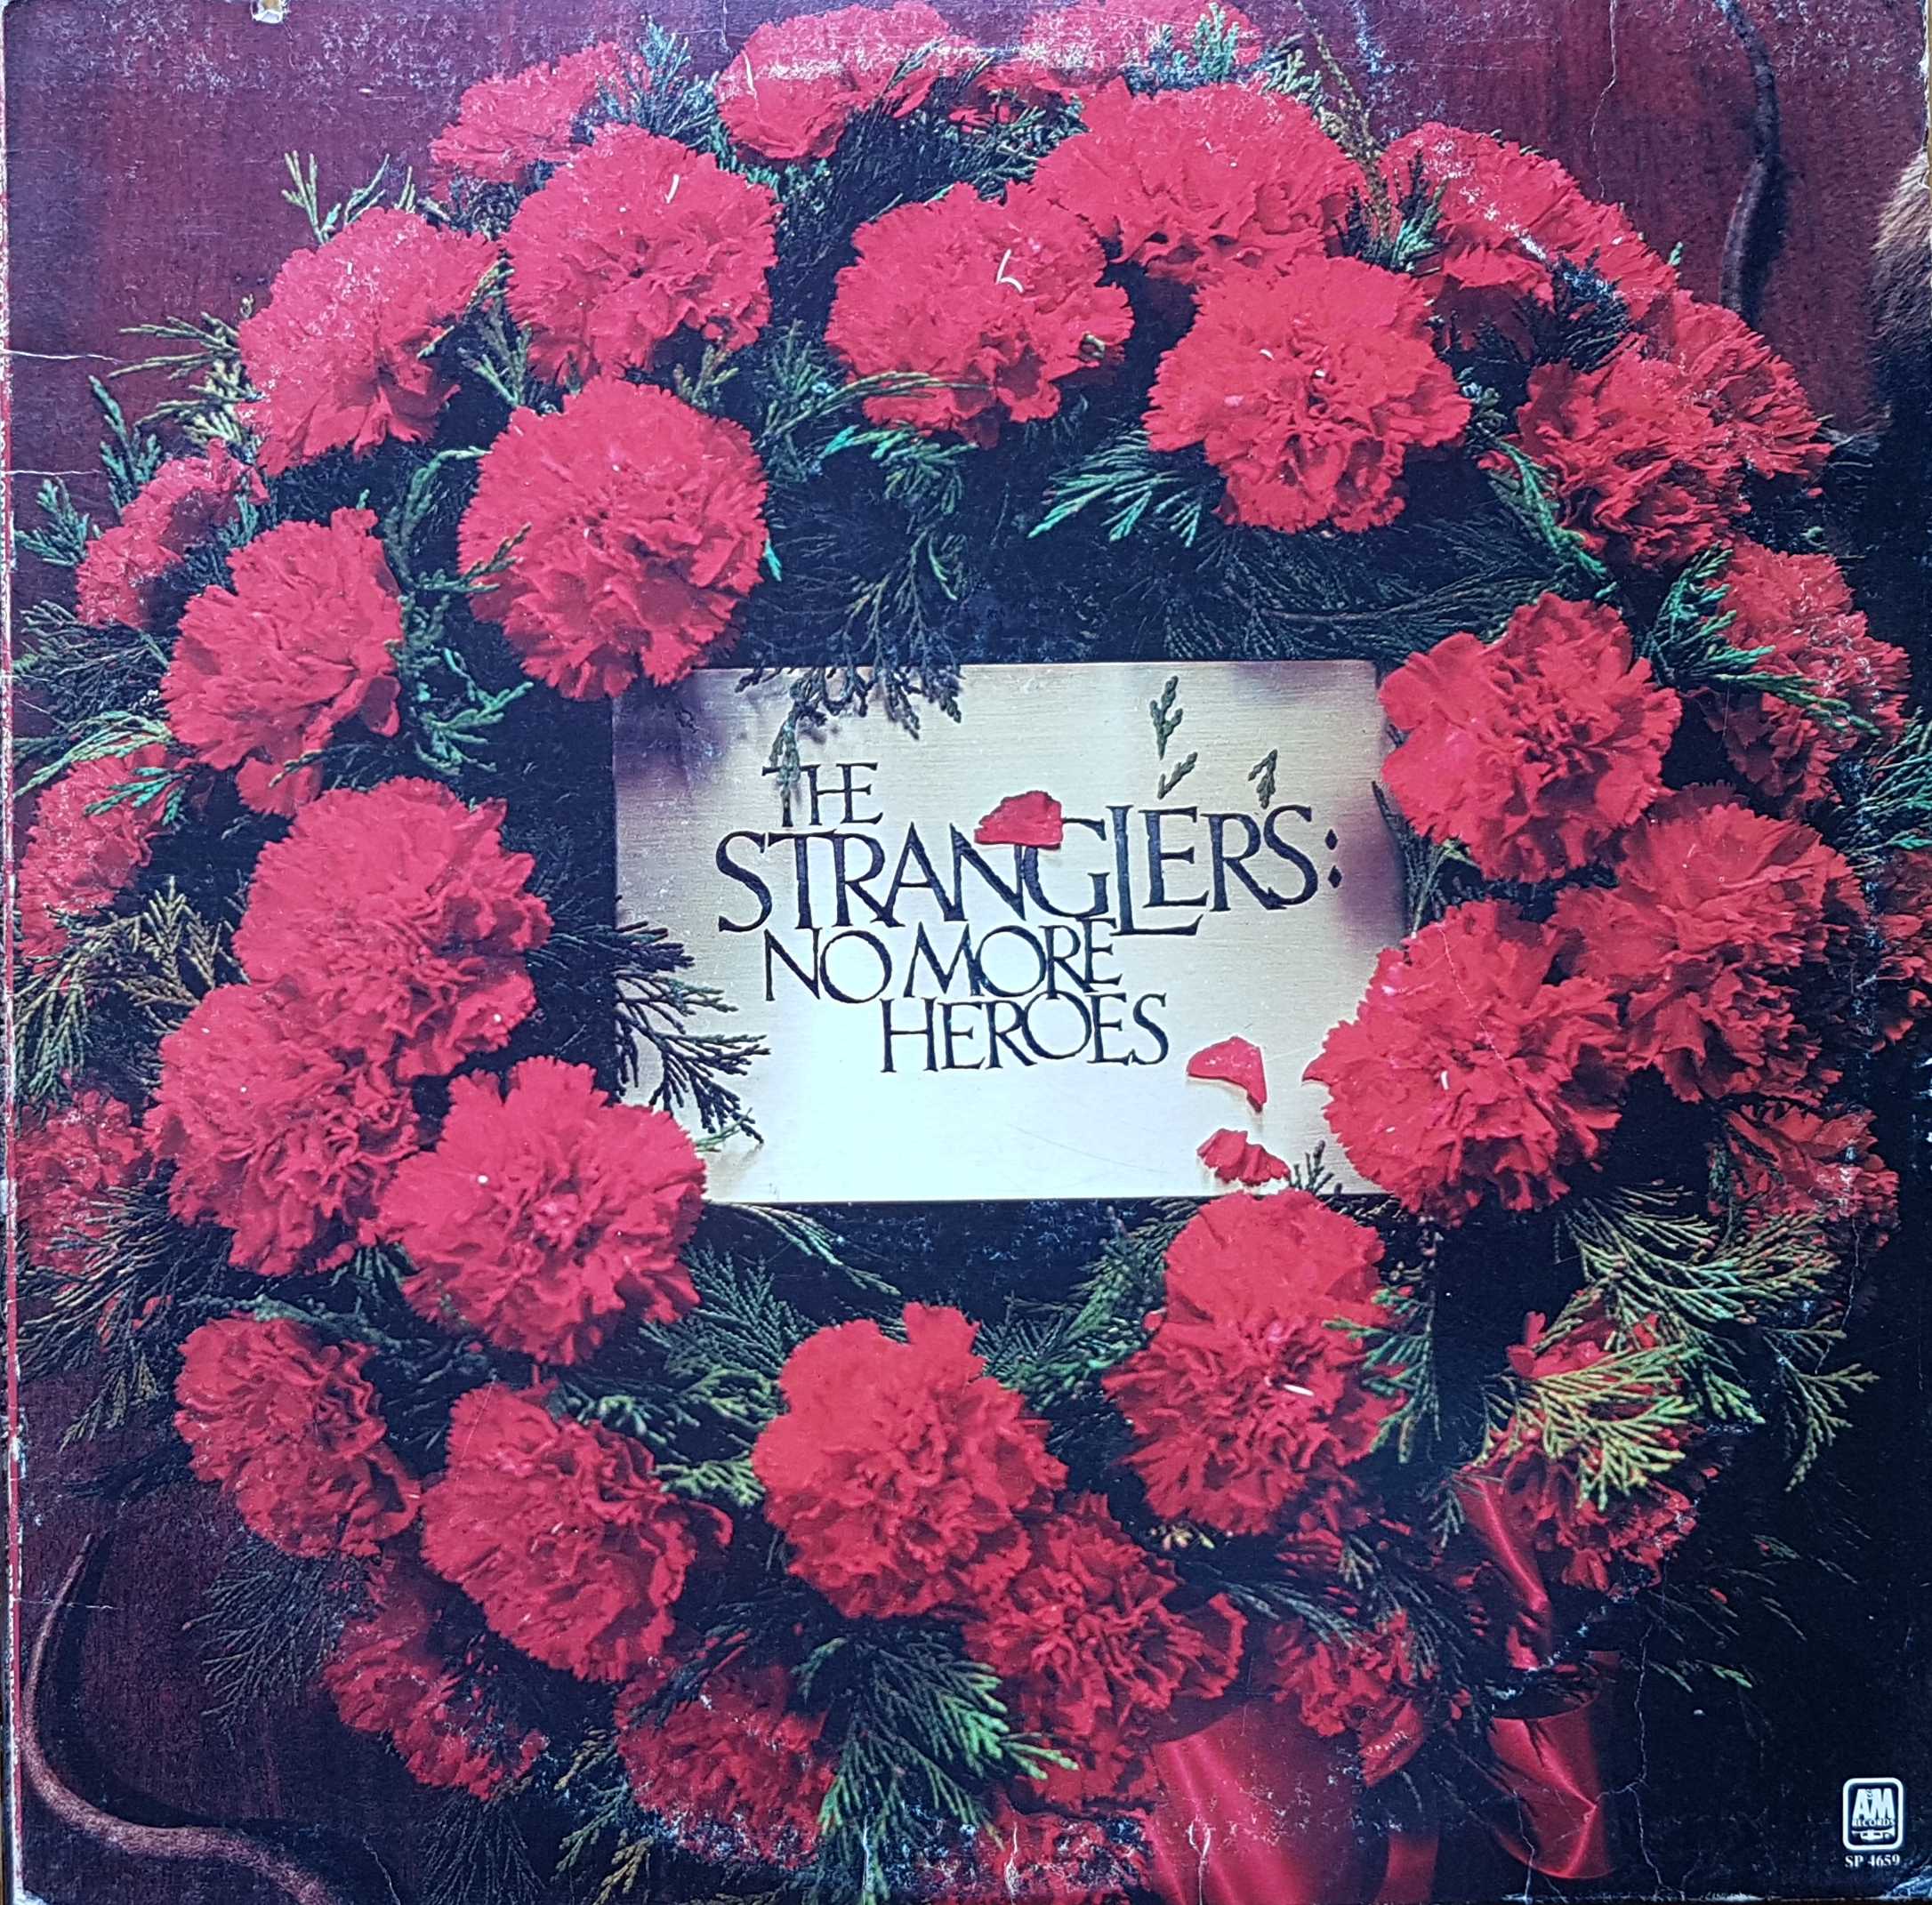 Picture of UAL 24070 No more heroes - Italian import by artist The Stranglers from The Stranglers albums